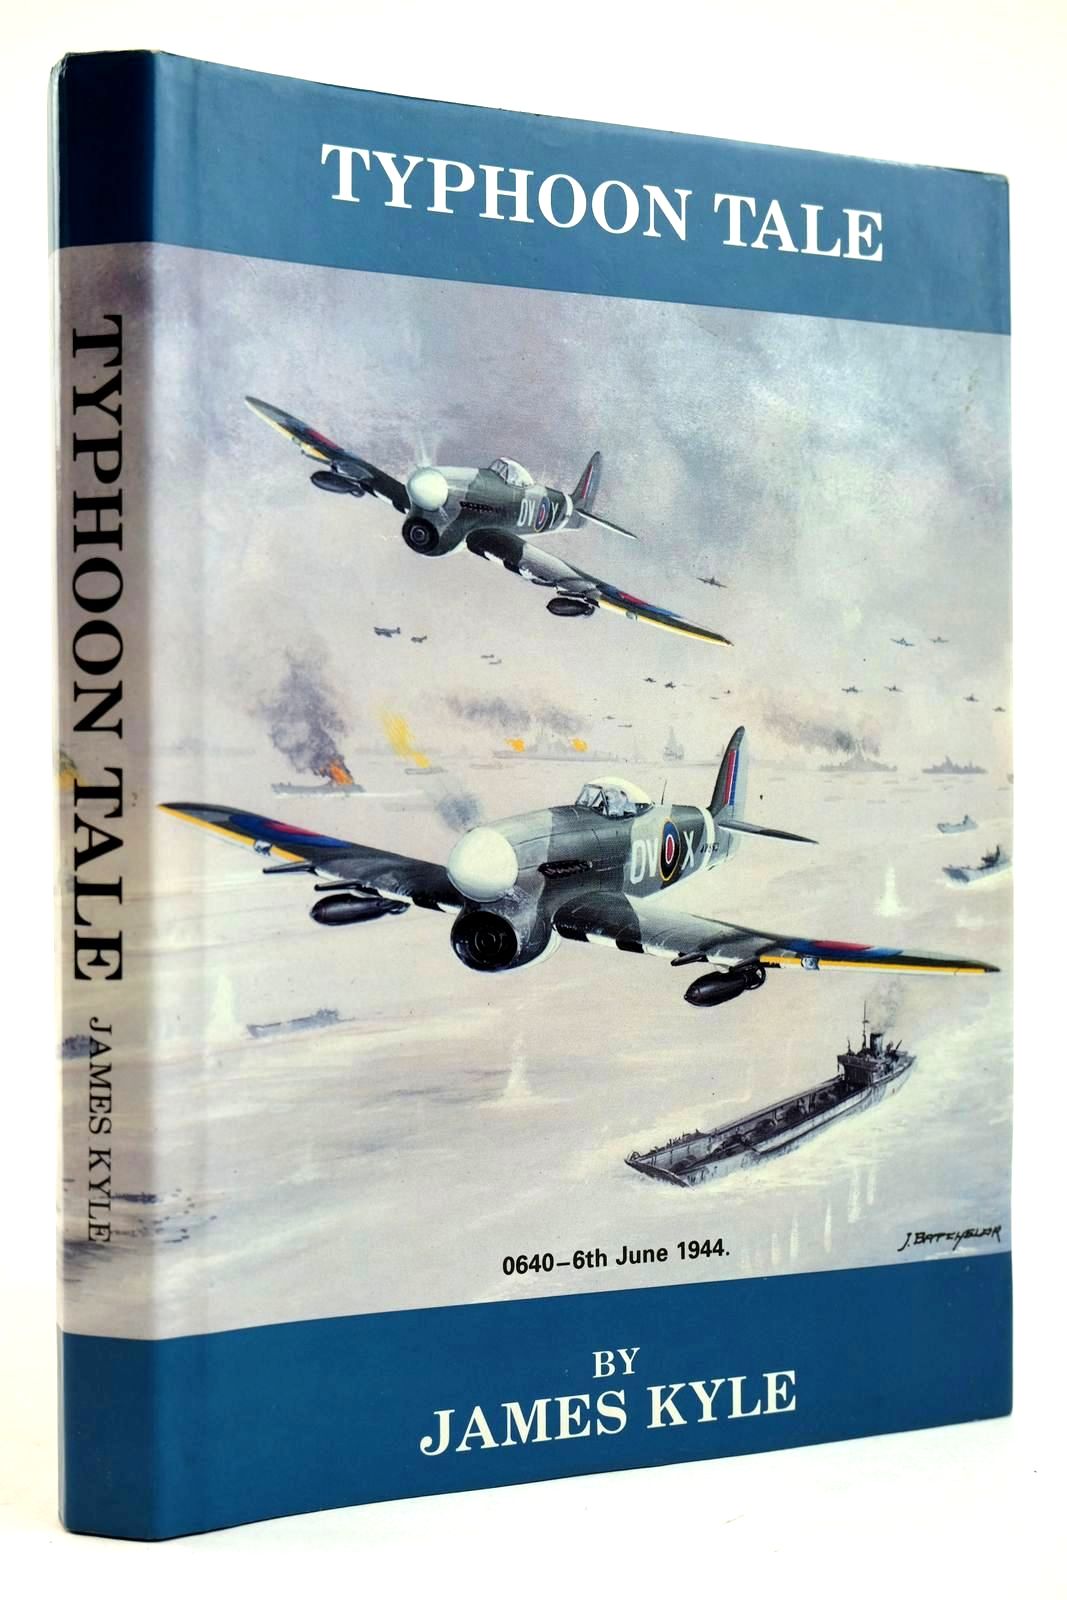 Photo of TYPHOON TALE written by Kyle, James published by Biggar & Co. (publishers) Ltd. (STOCK CODE: 2132086)  for sale by Stella & Rose's Books